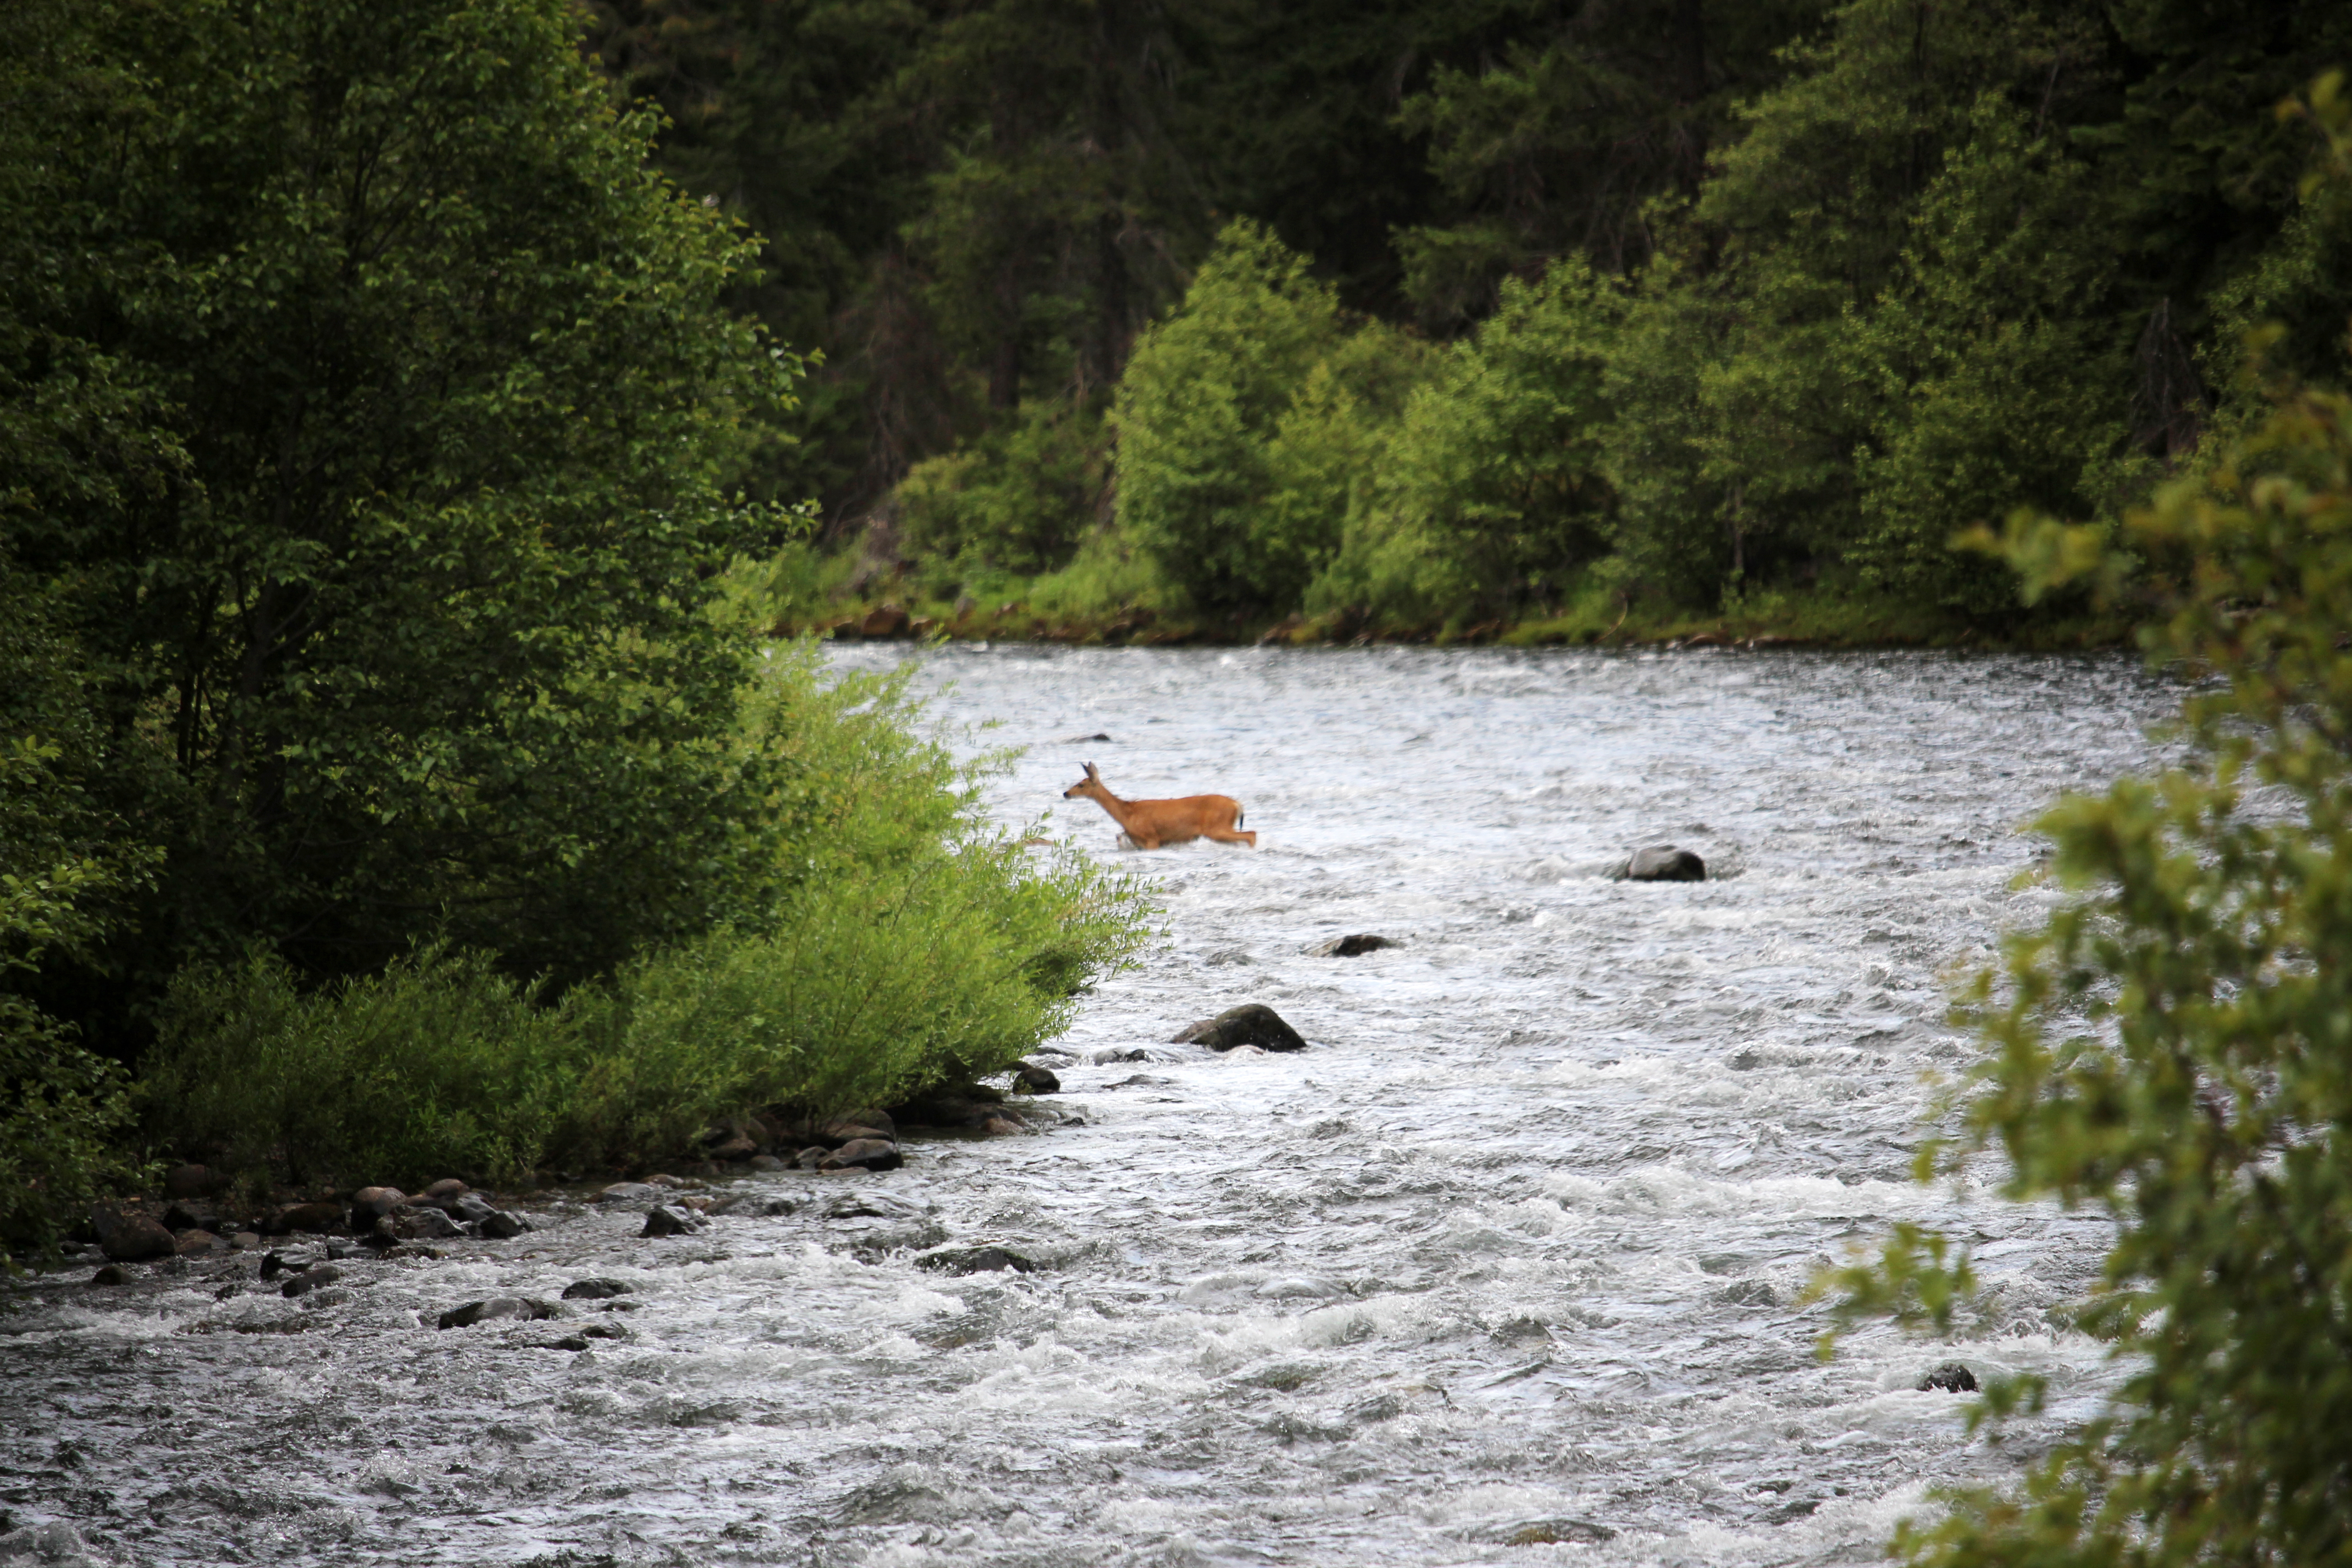 Deer crossing a flowing river with greenery and trees in the background.